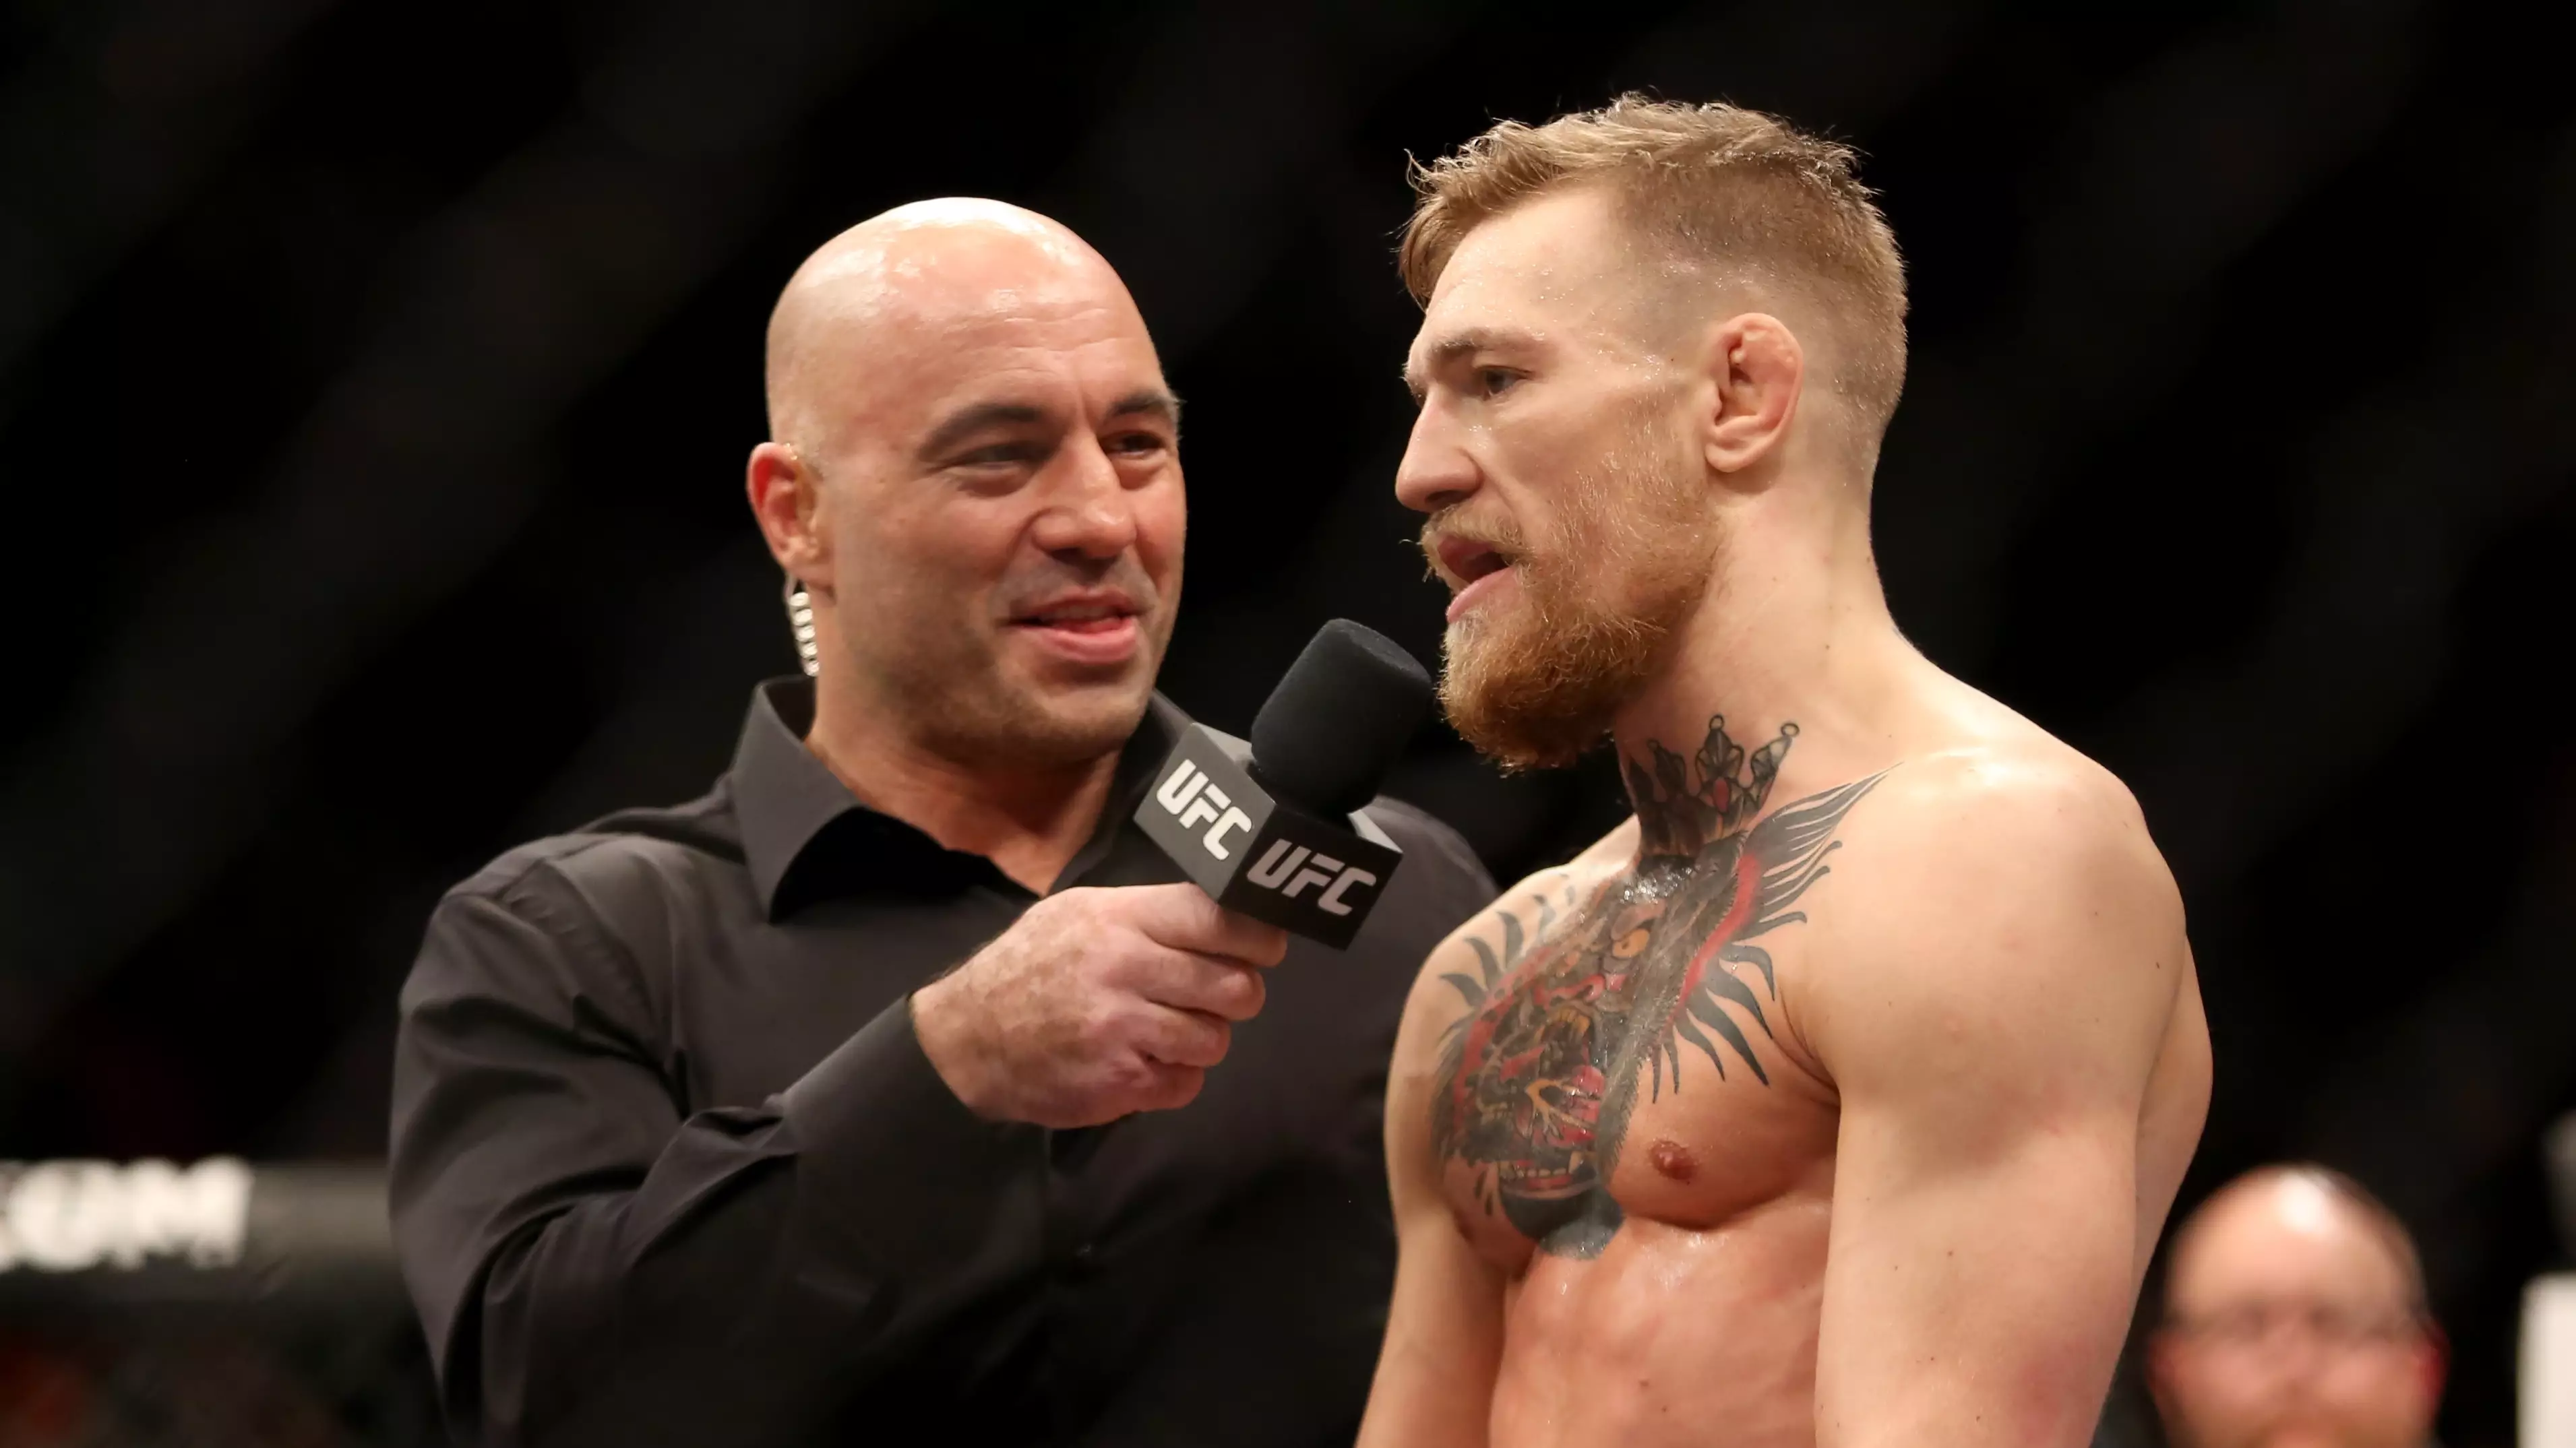 Joe Rogan Claims Conor McGregor Is 'Not The Same Animal' He Once Was